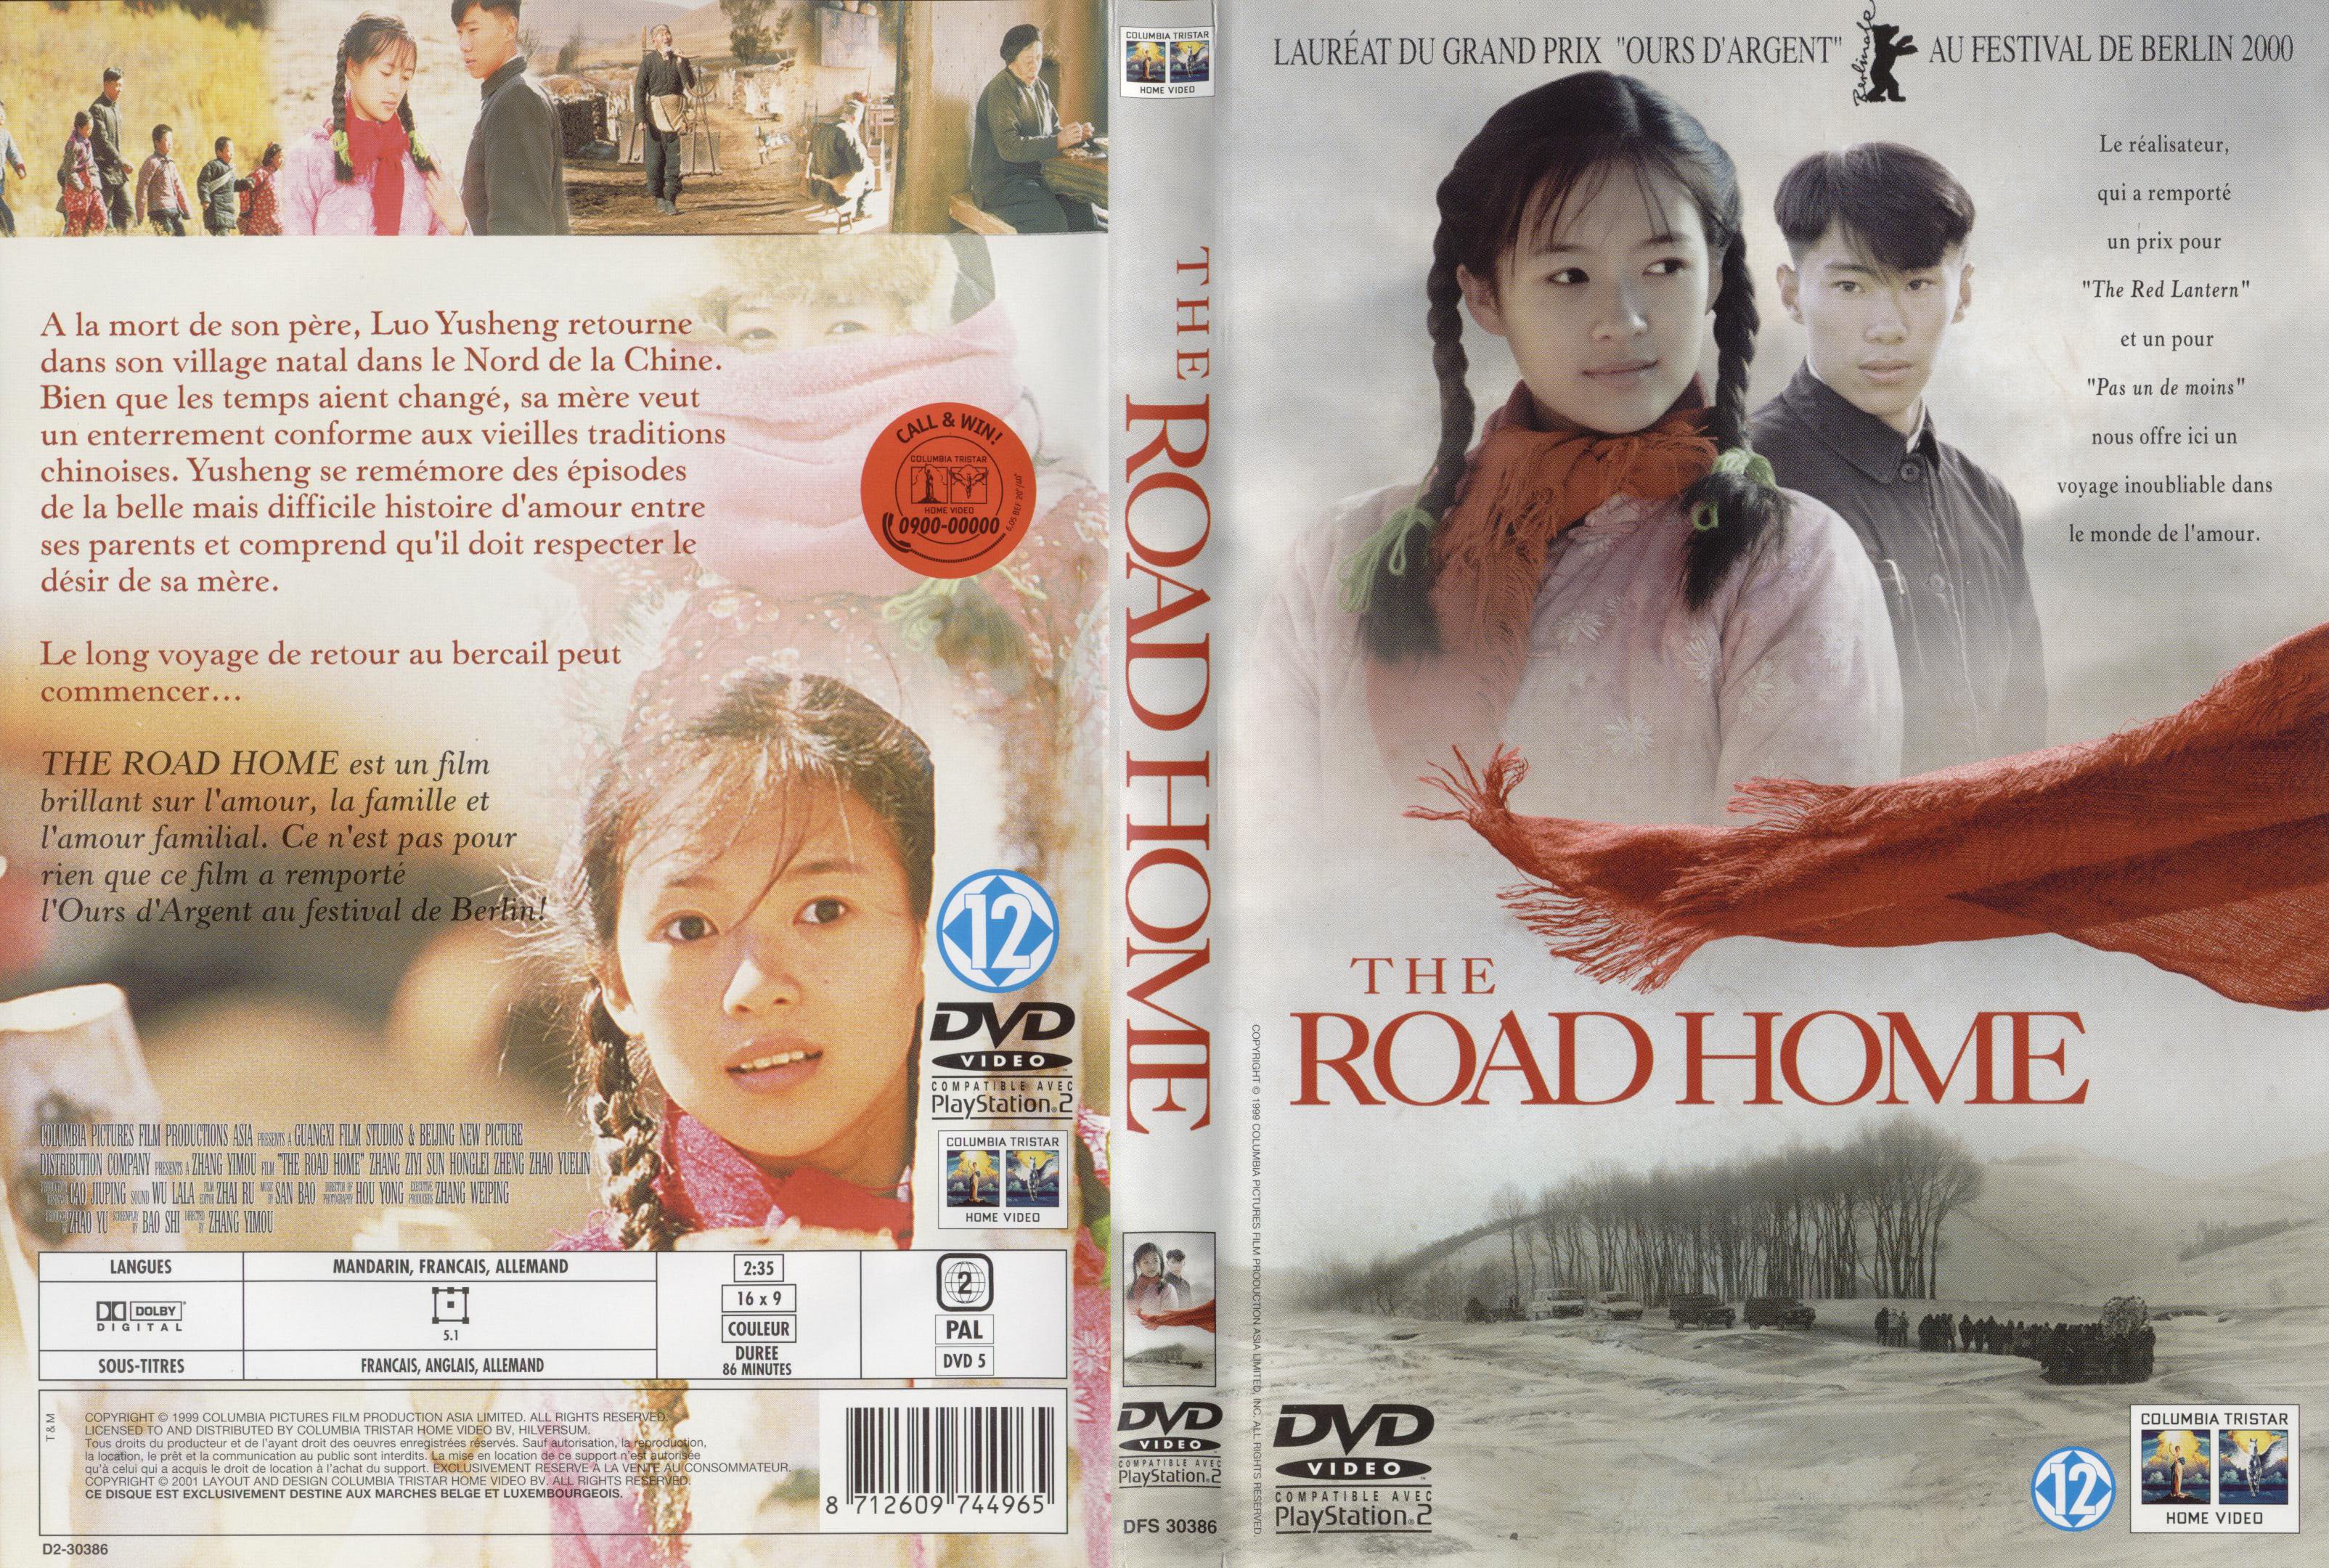 Jaquette DVD The road home